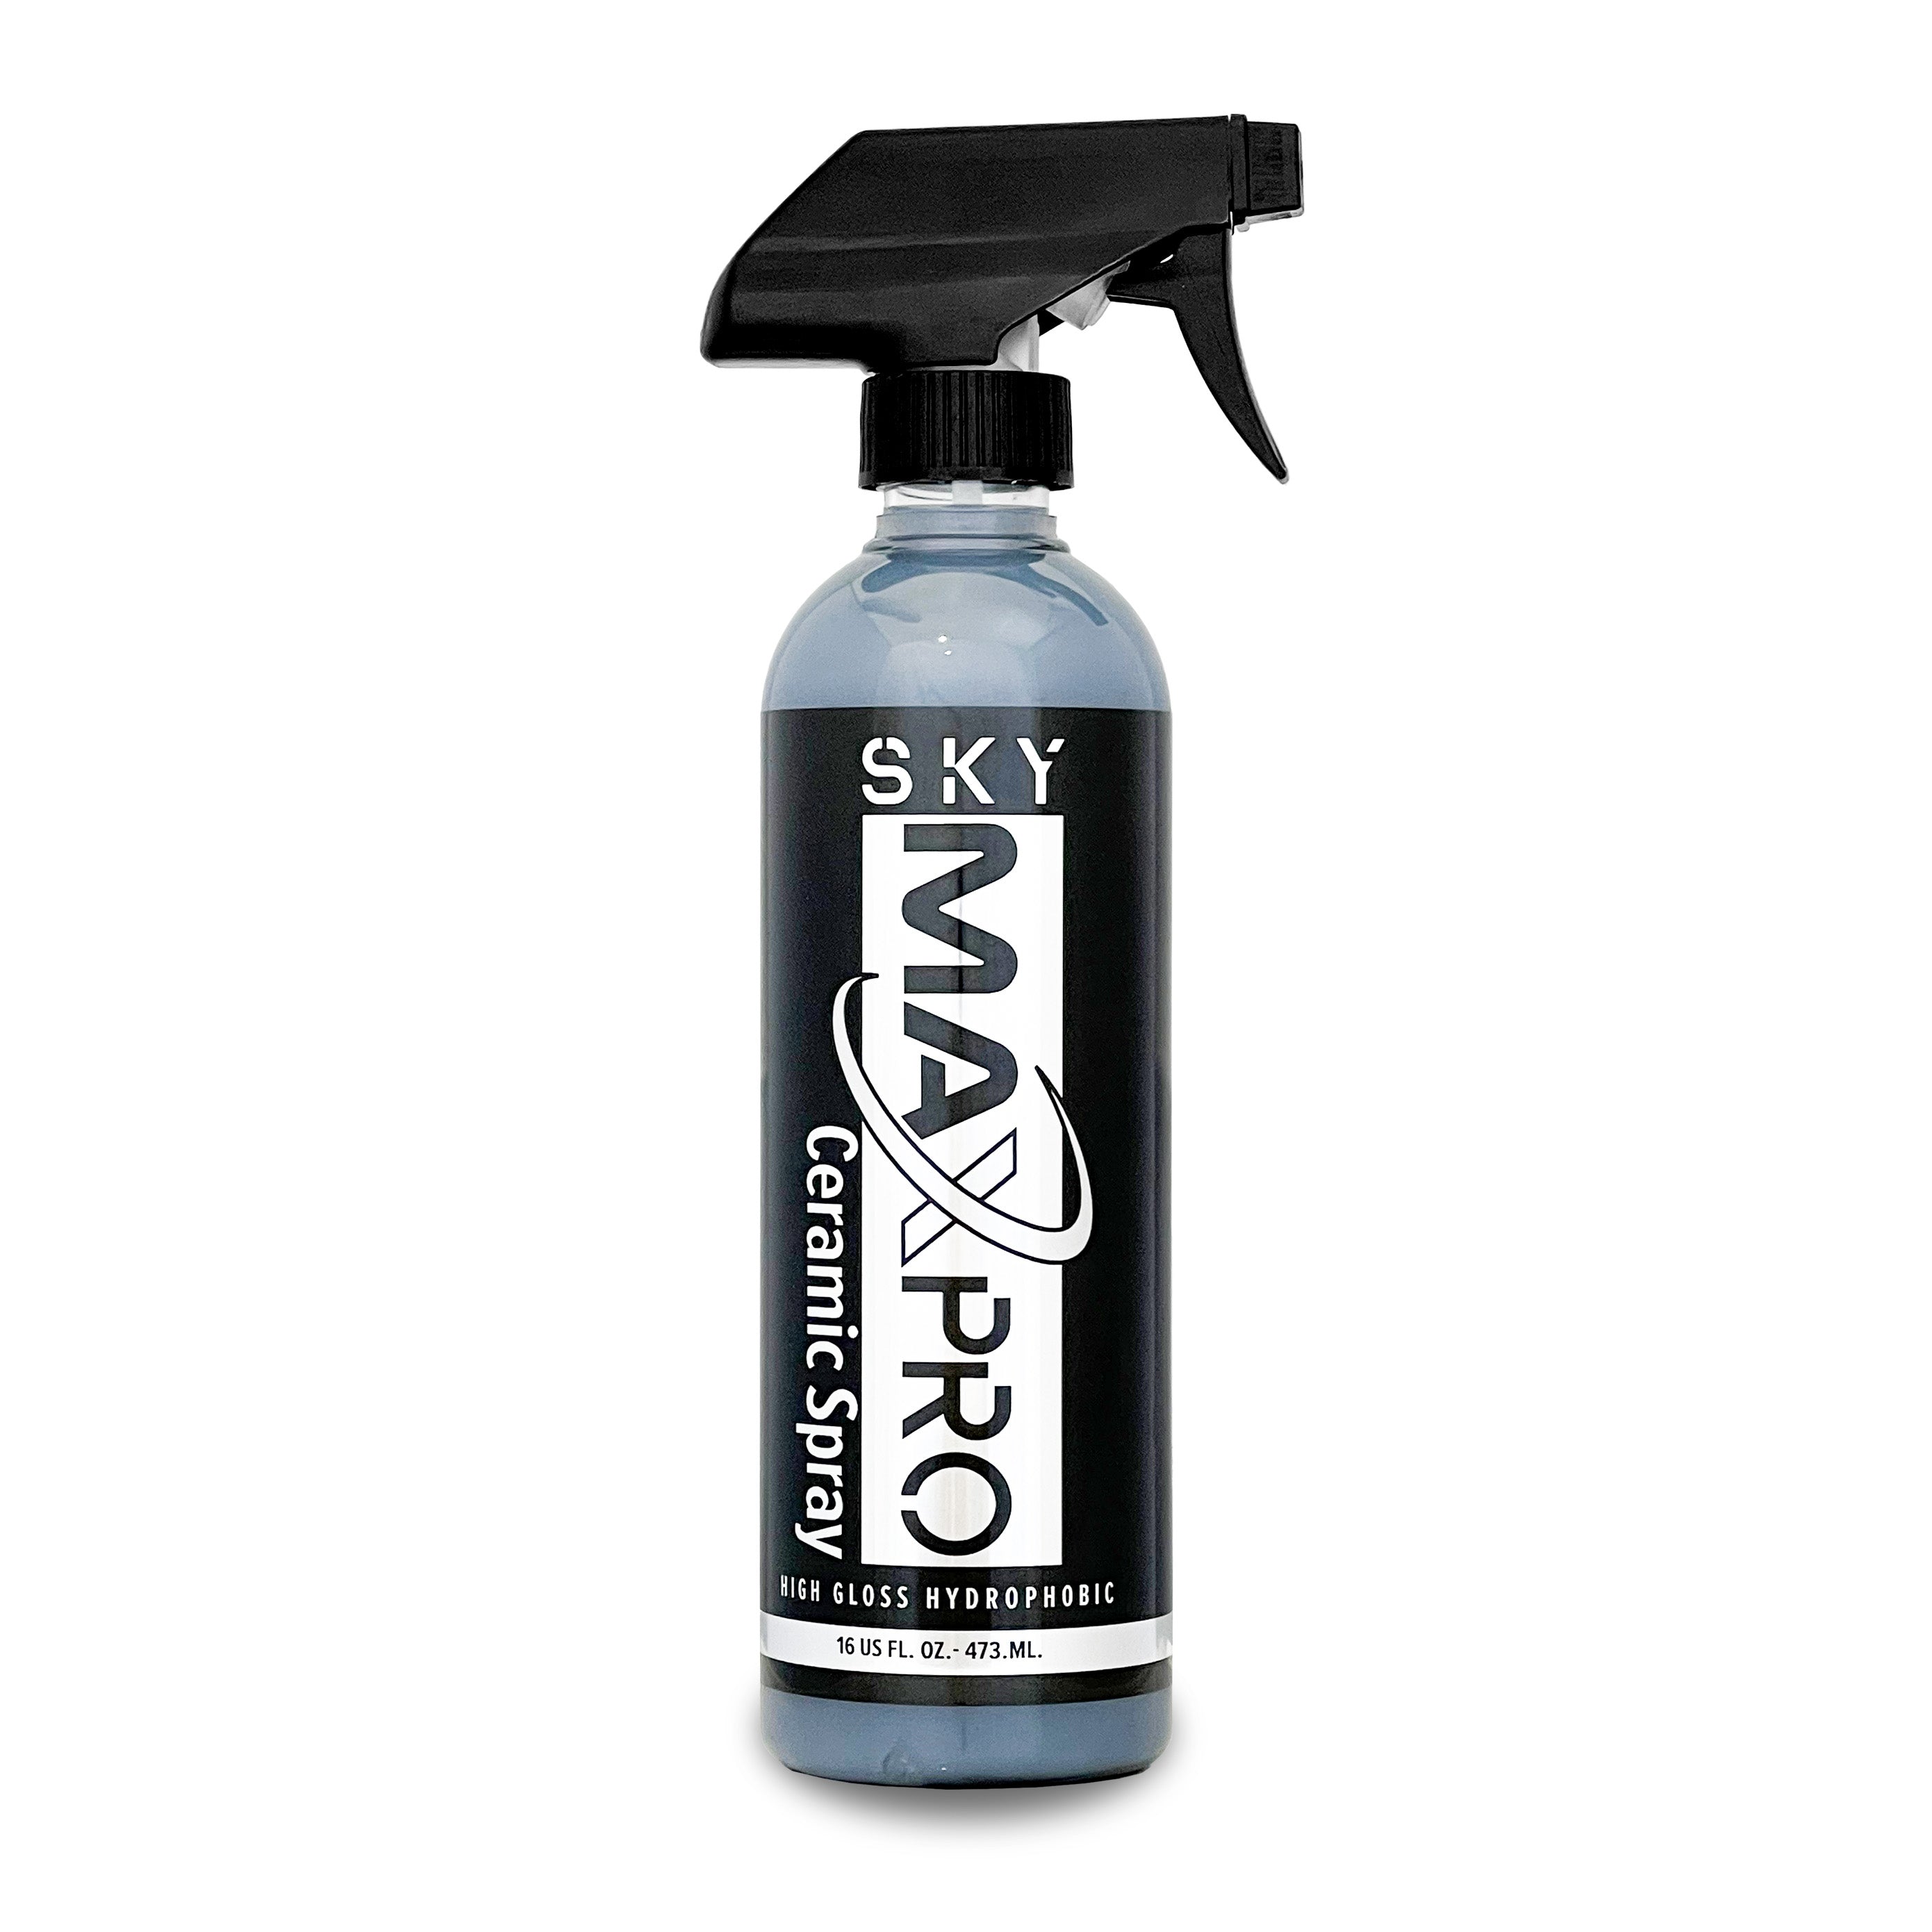 PRO CERAMIC GRAPHENE SPRAY COATING WITH SILICON DIOXIDE – SKY MAXPRO